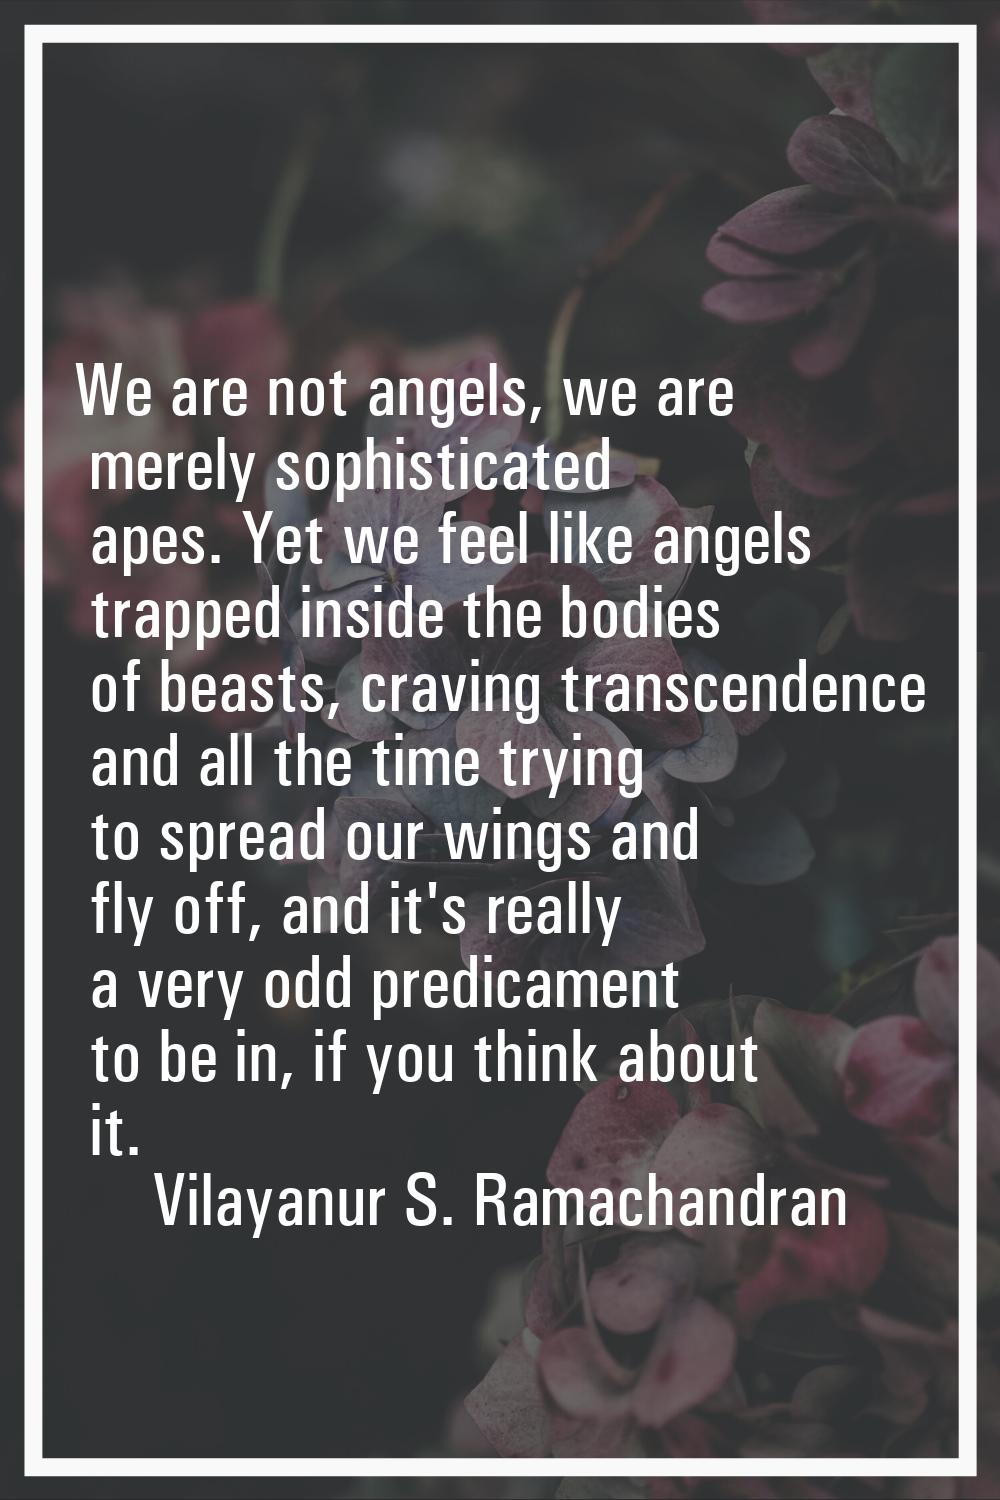 We are not angels, we are merely sophisticated apes. Yet we feel like angels trapped inside the bod